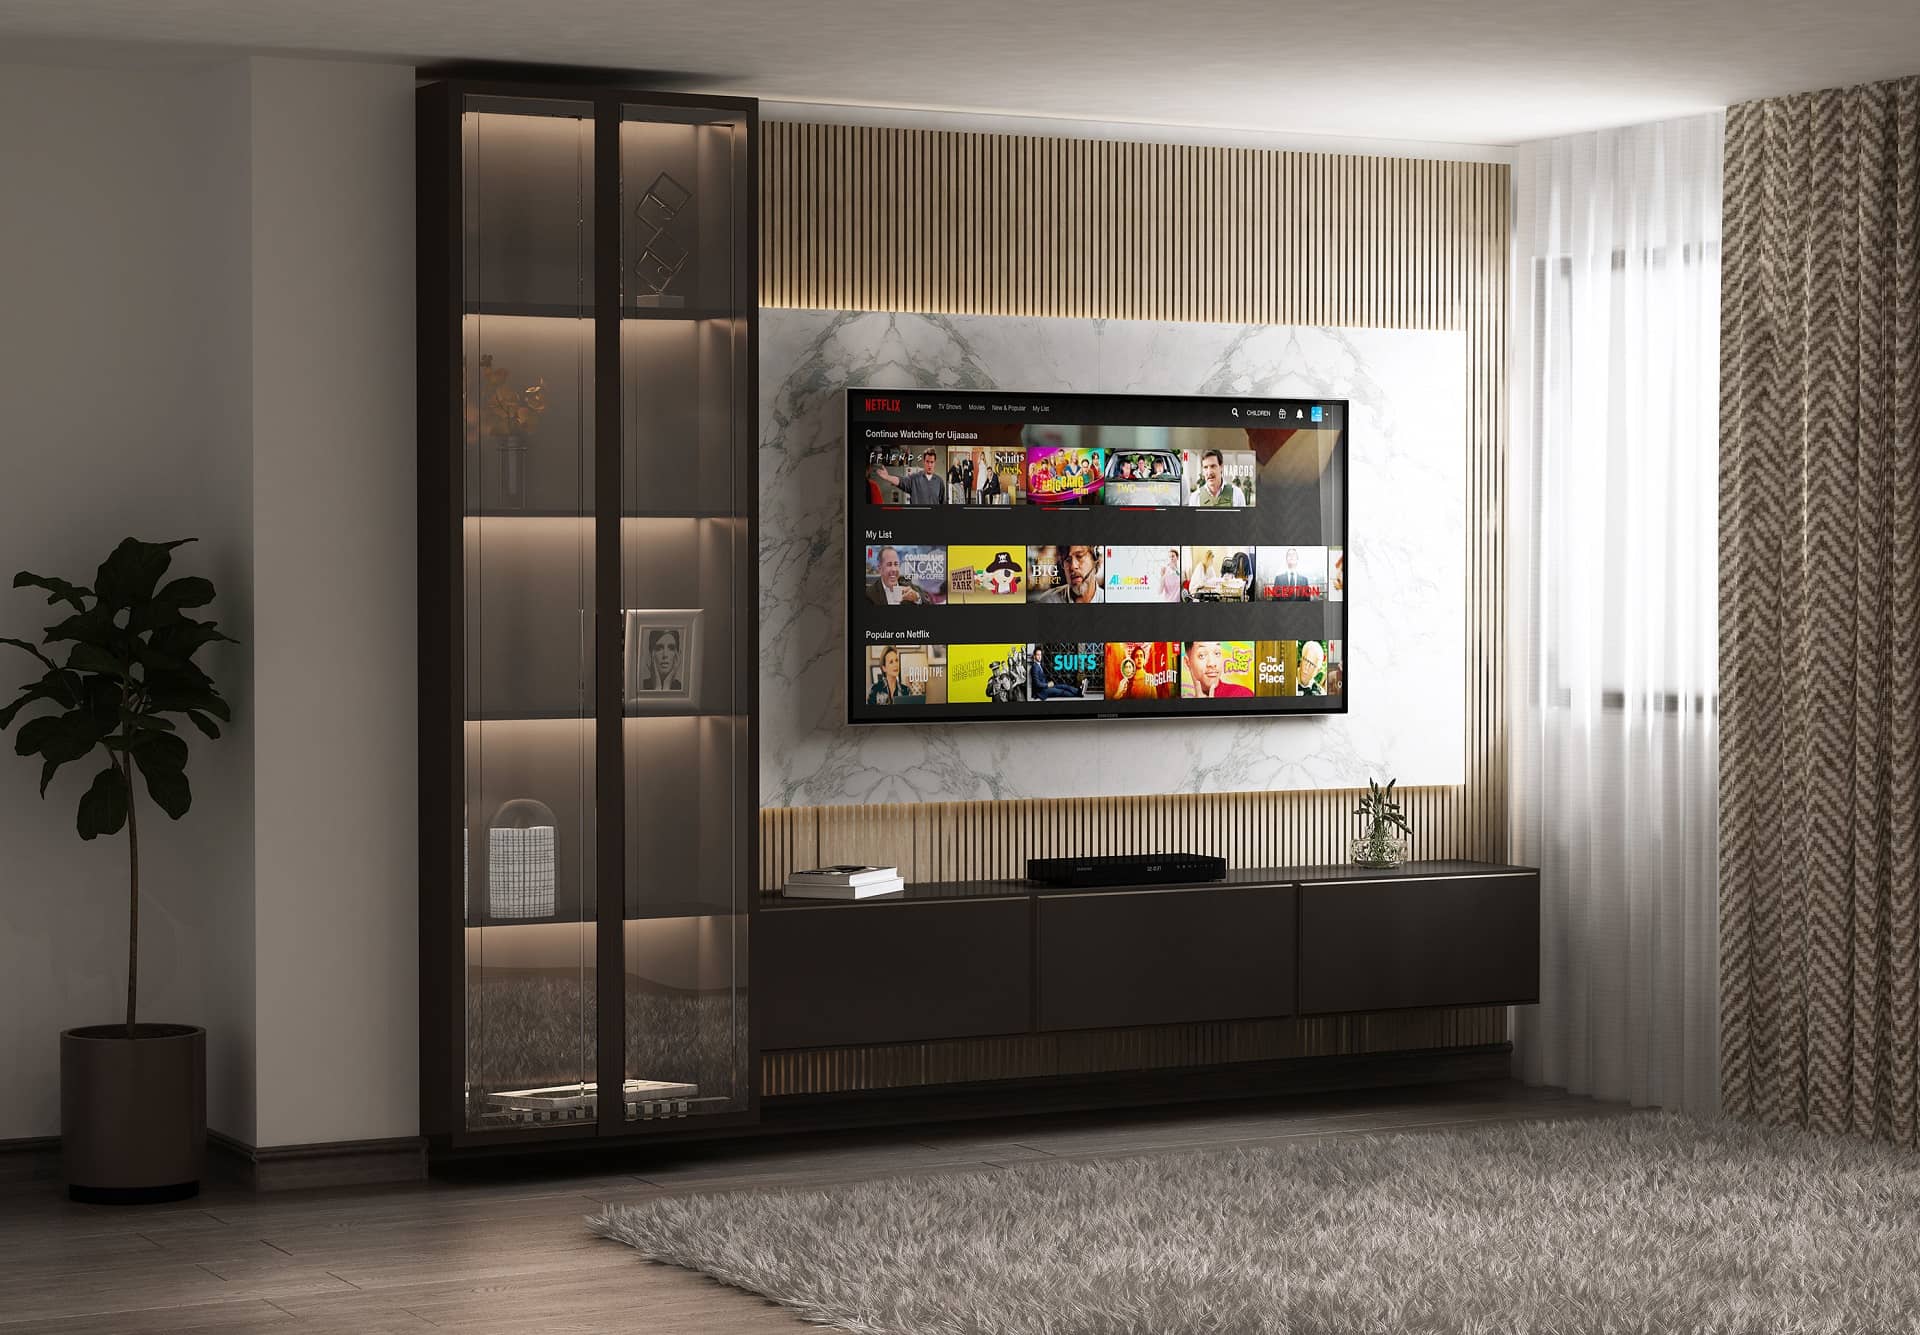 TV Stand Ideas: 19 Designs To Stylishly Elevate Your TV